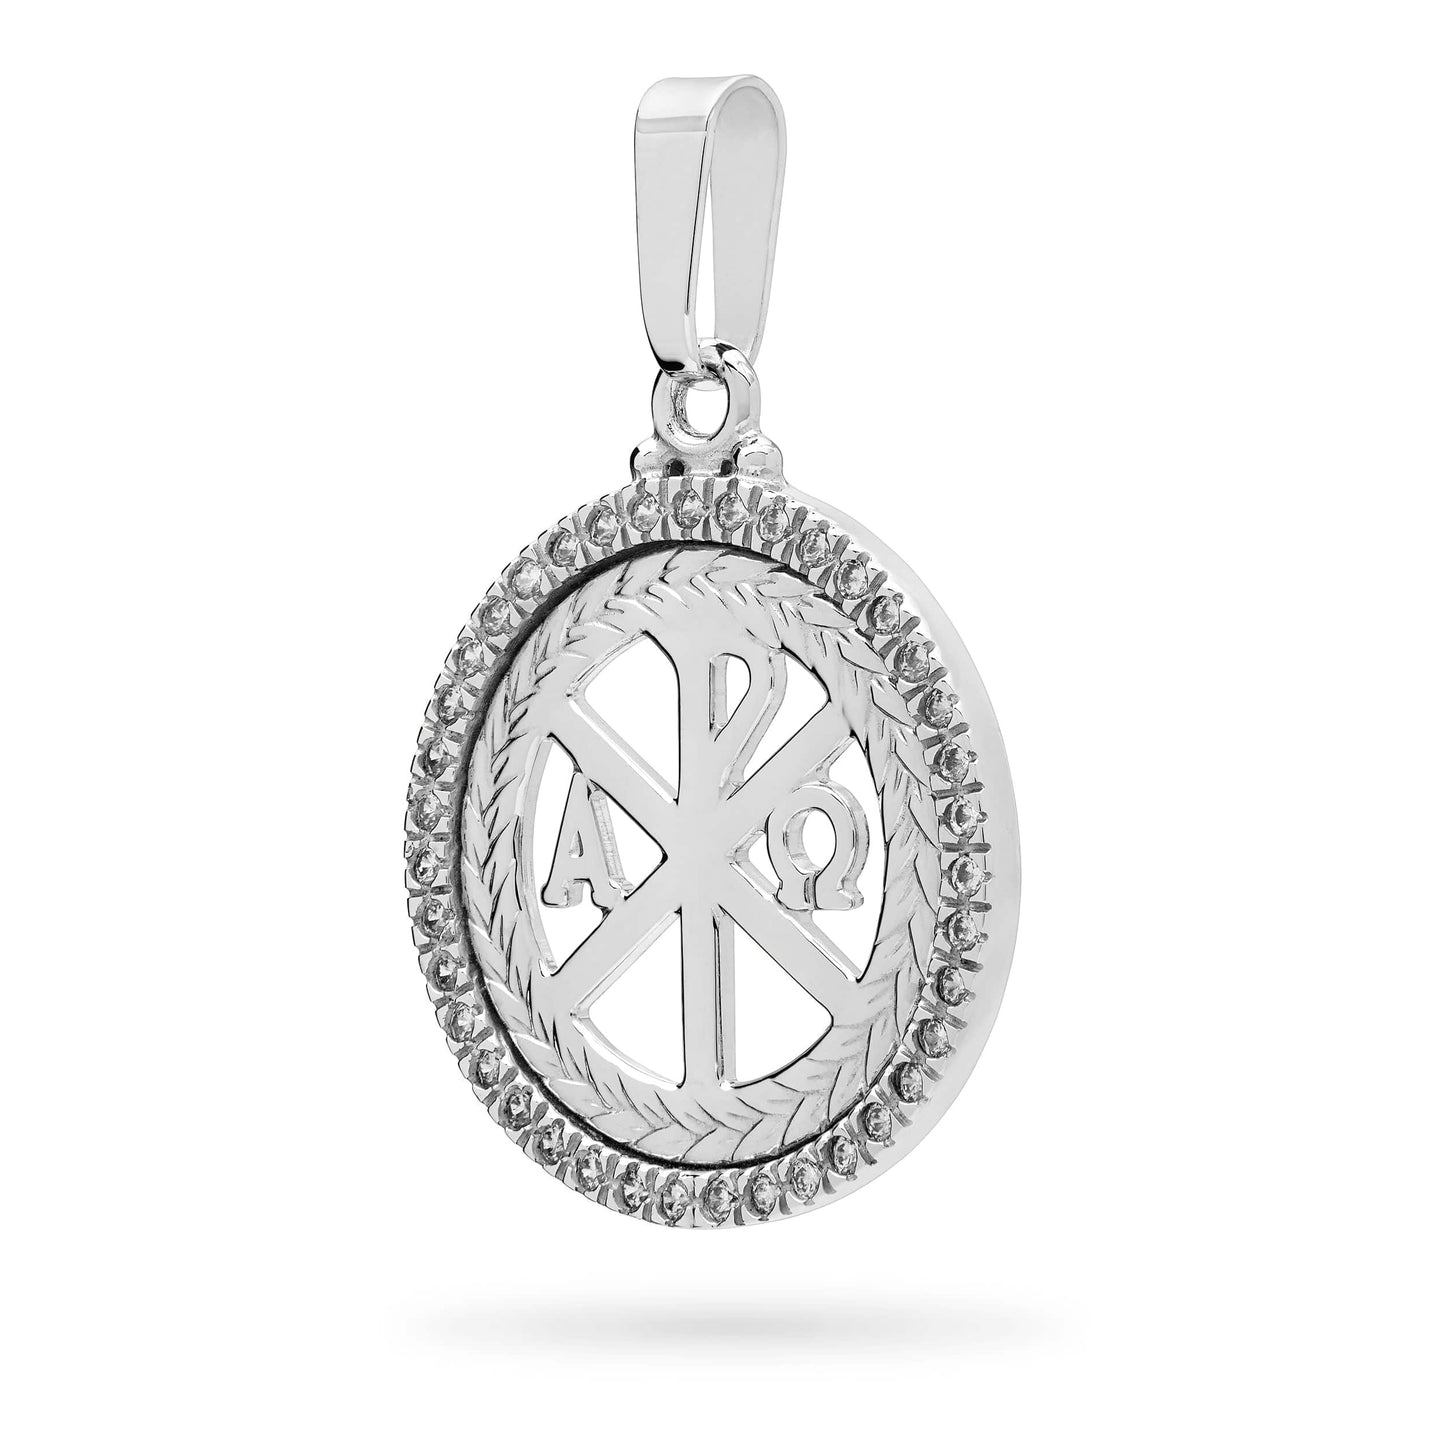 MONDO CATTOLICO Medal 23 mm (0.90 in) Round Sterling Silver Peace Symbol Medal